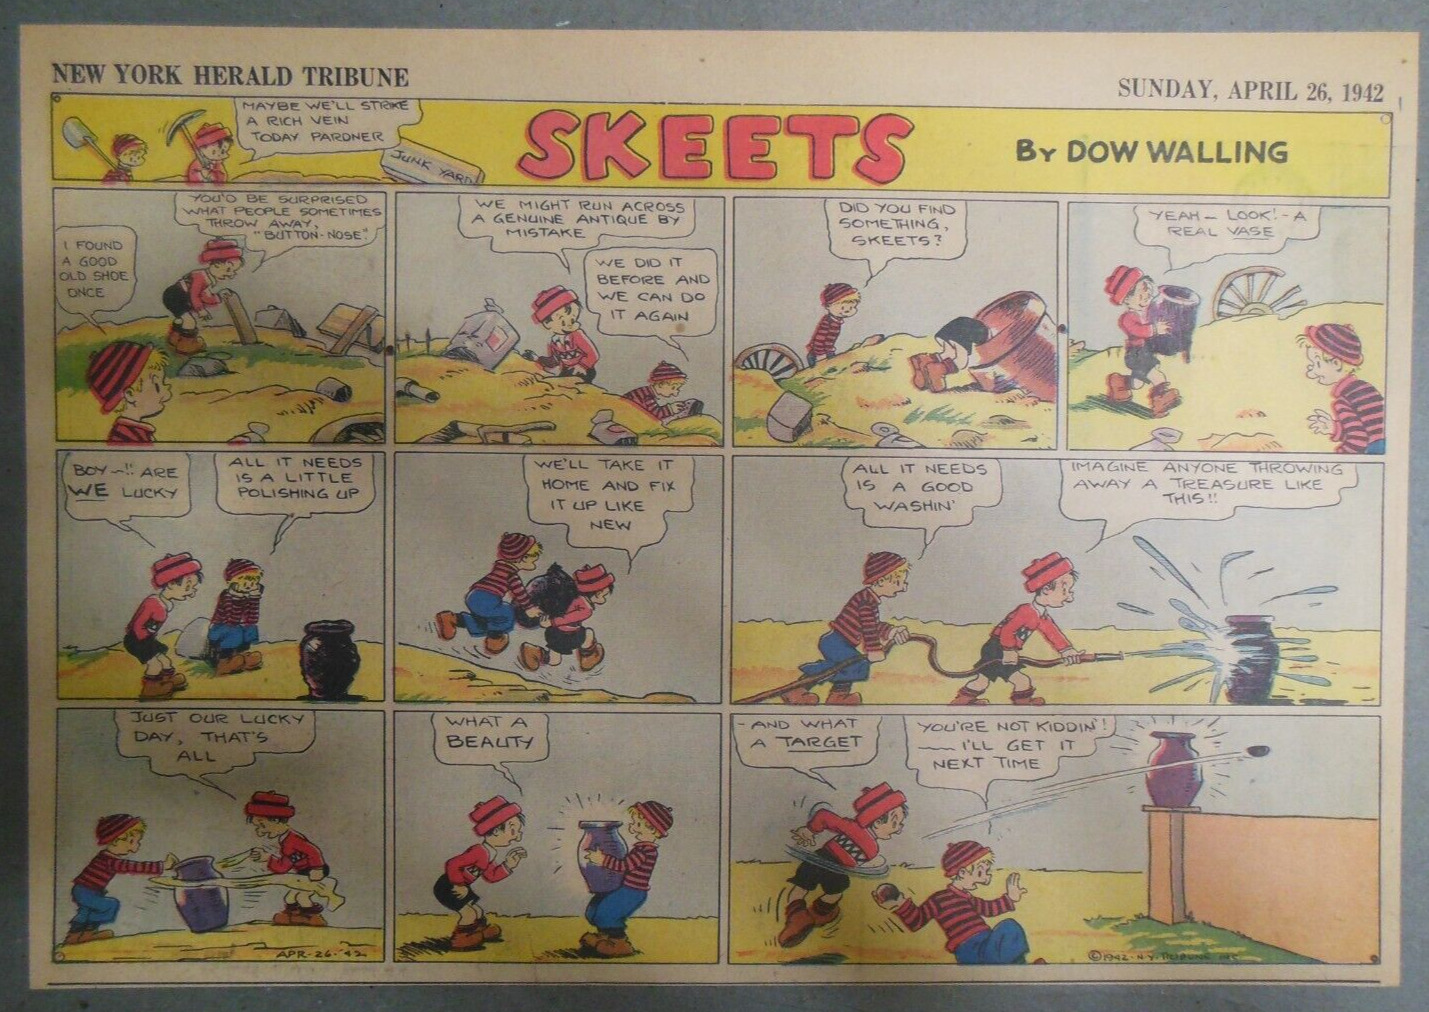 Skeets Sunday Page by Dow Walling from 4/26/1942 Half Page Size: 11 x 15 inches